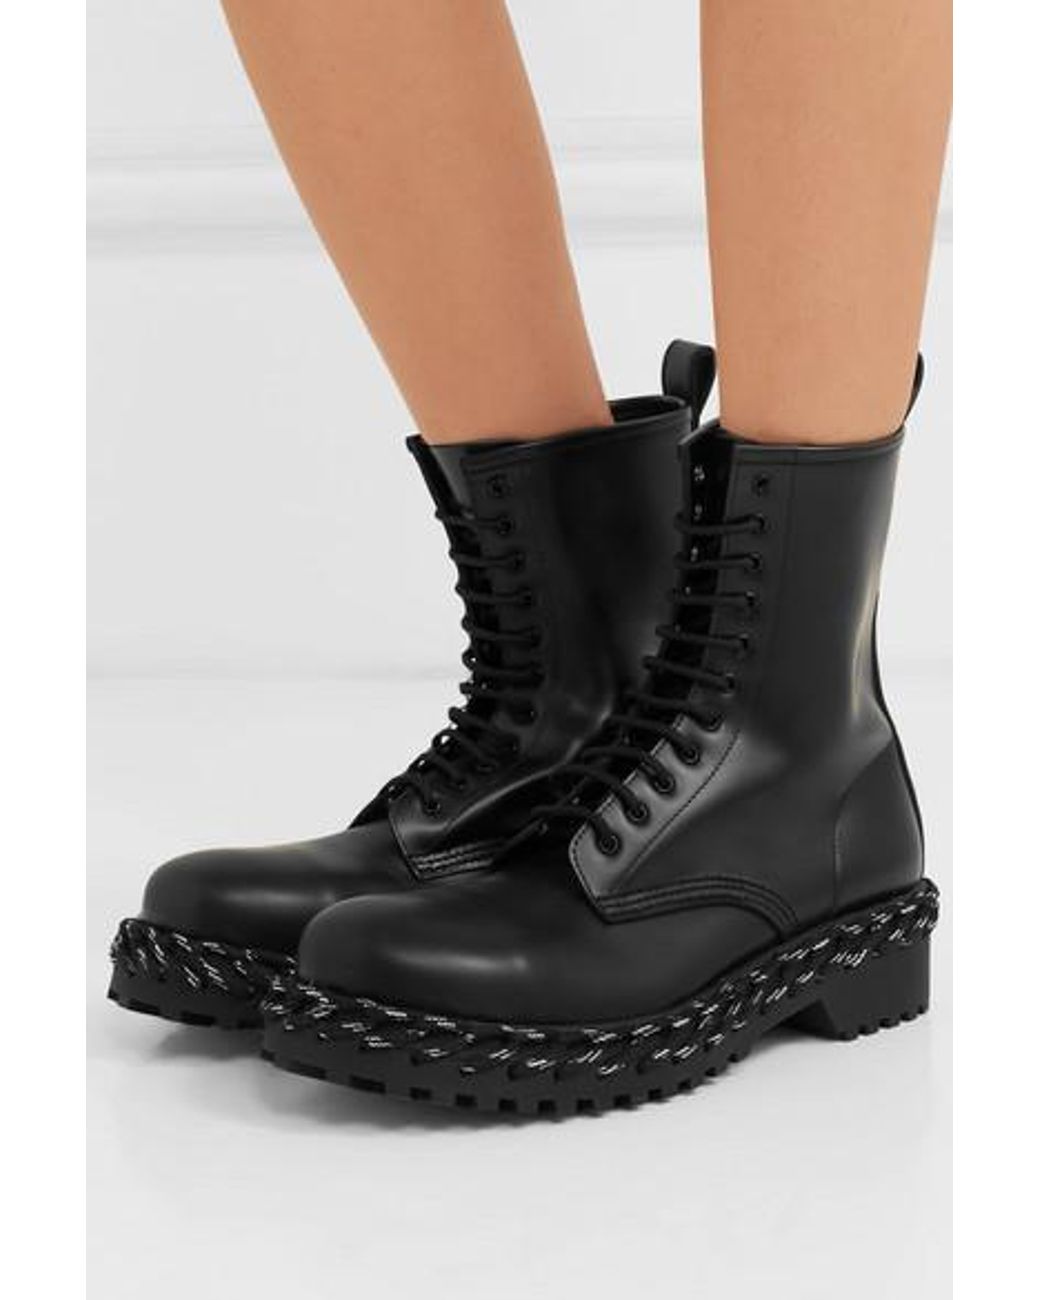 Balenciaga Black Rope-stitched Leather Boots | Lyst